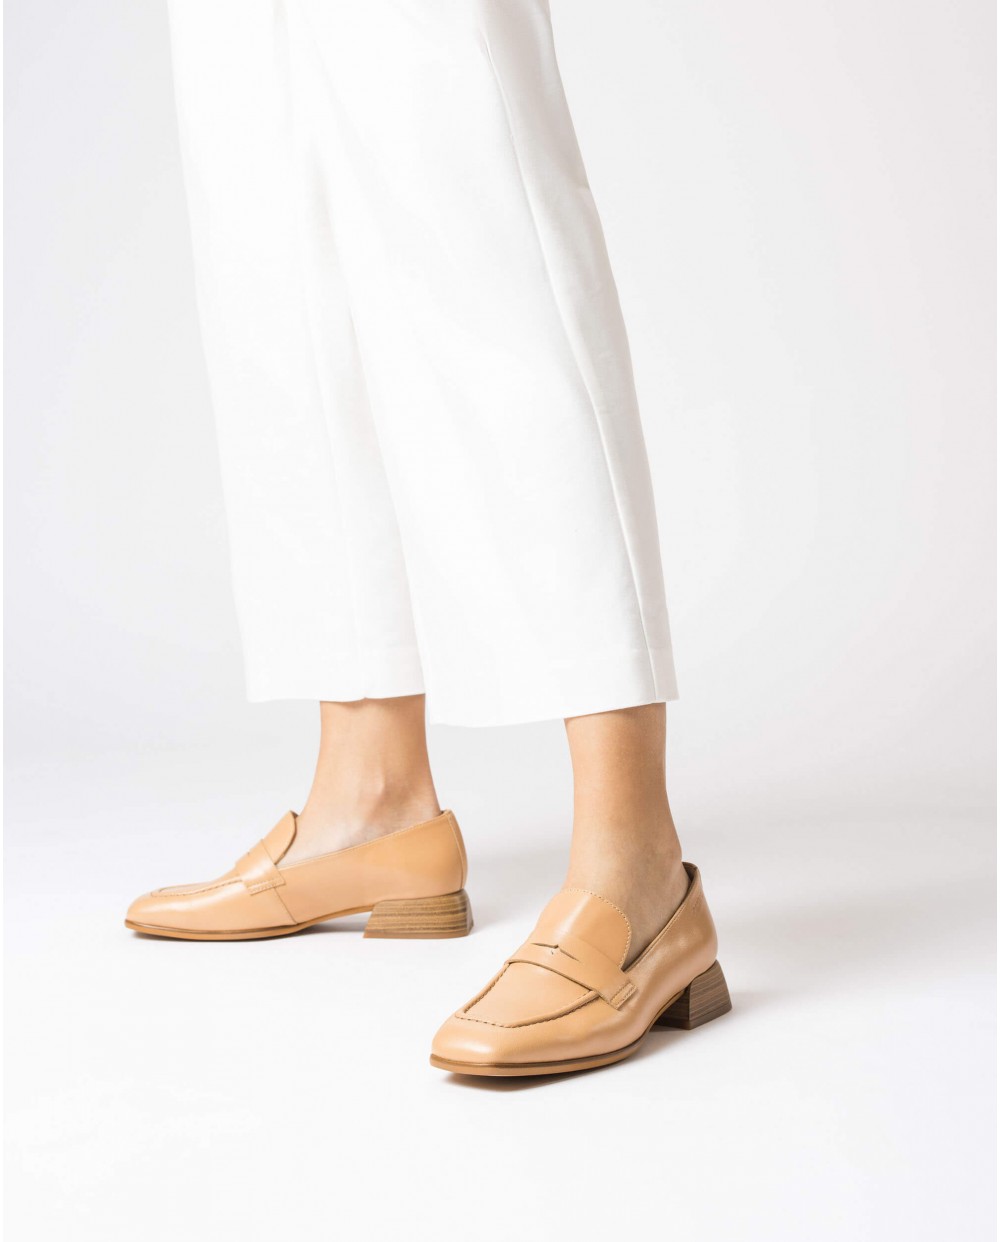 Wonders-Loafers-Ander sand moccasin